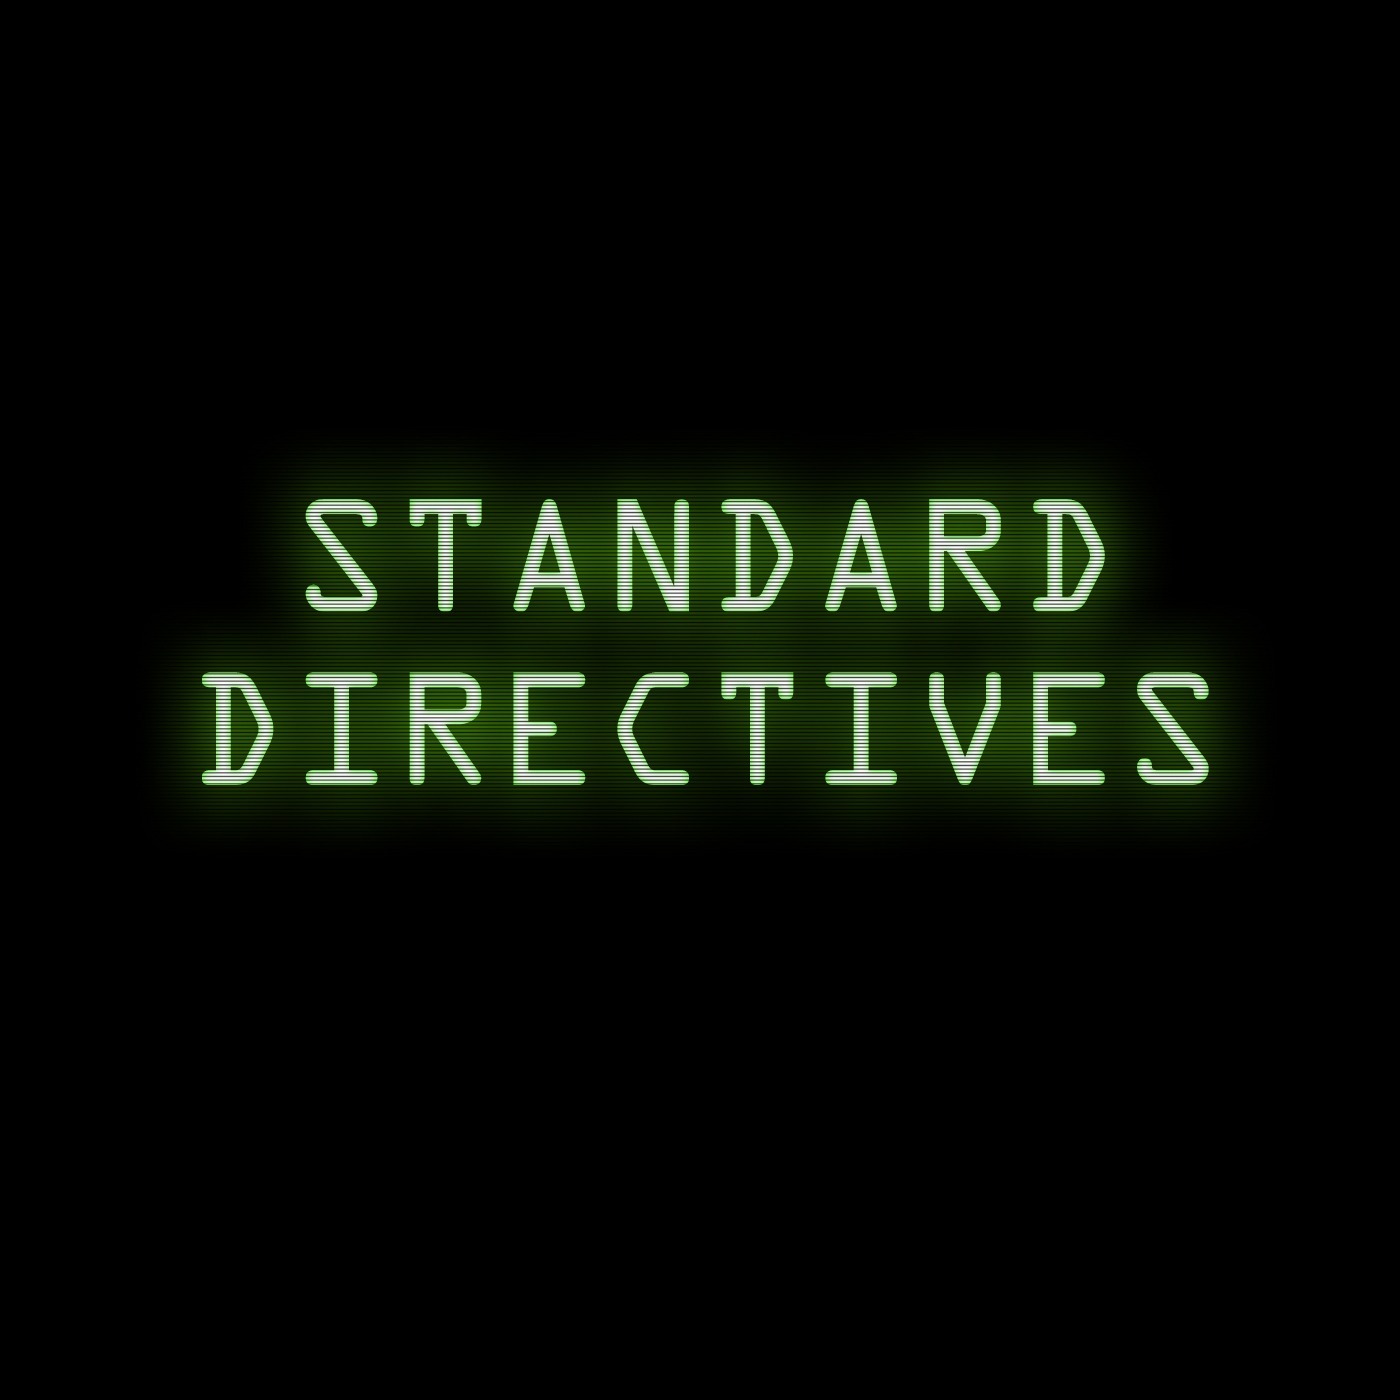 Standard Directive 008: The Good Things Add Up.